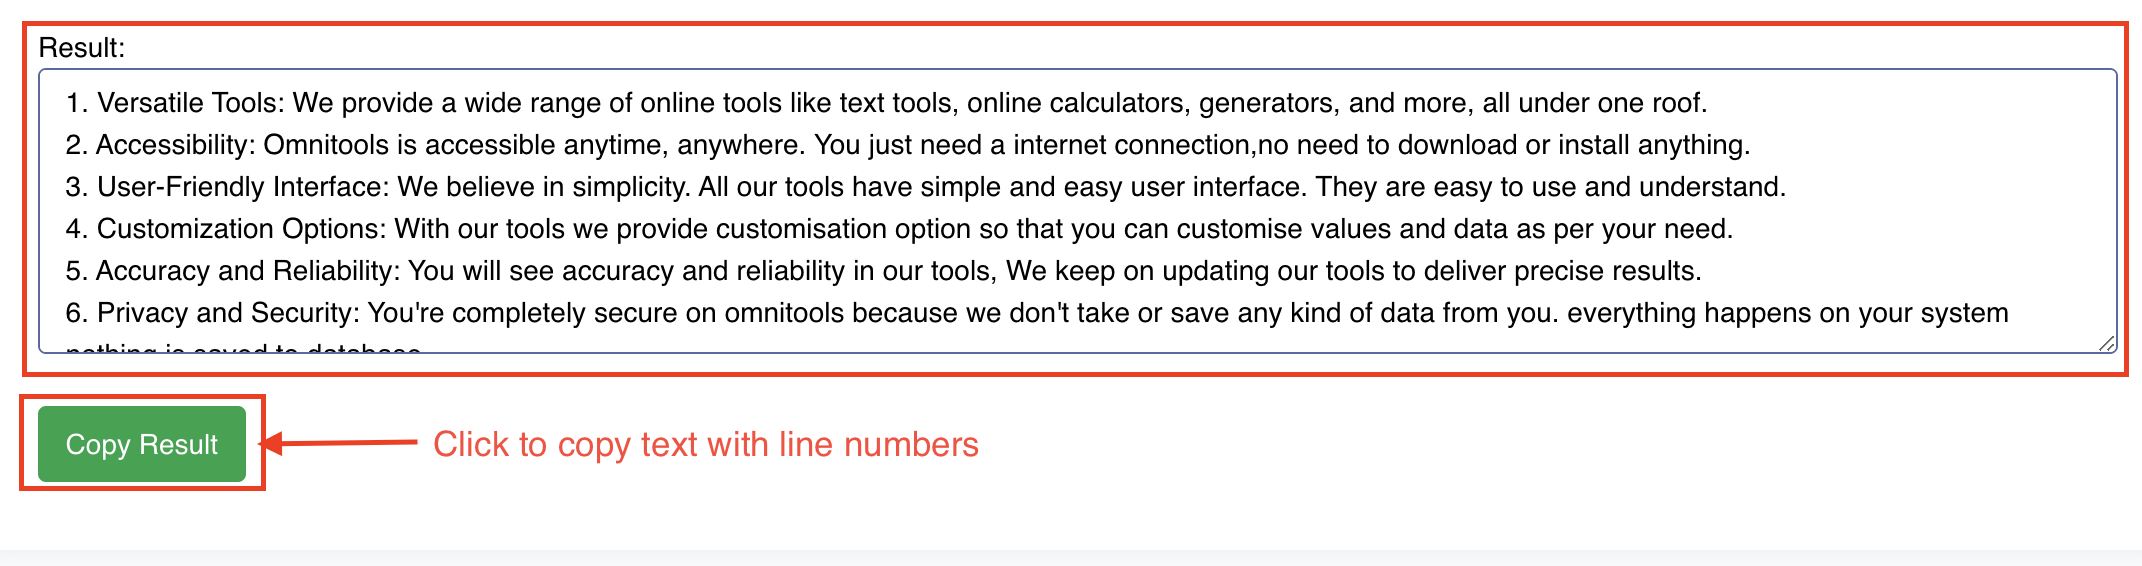 Line numbering tool - add line numbers to your text